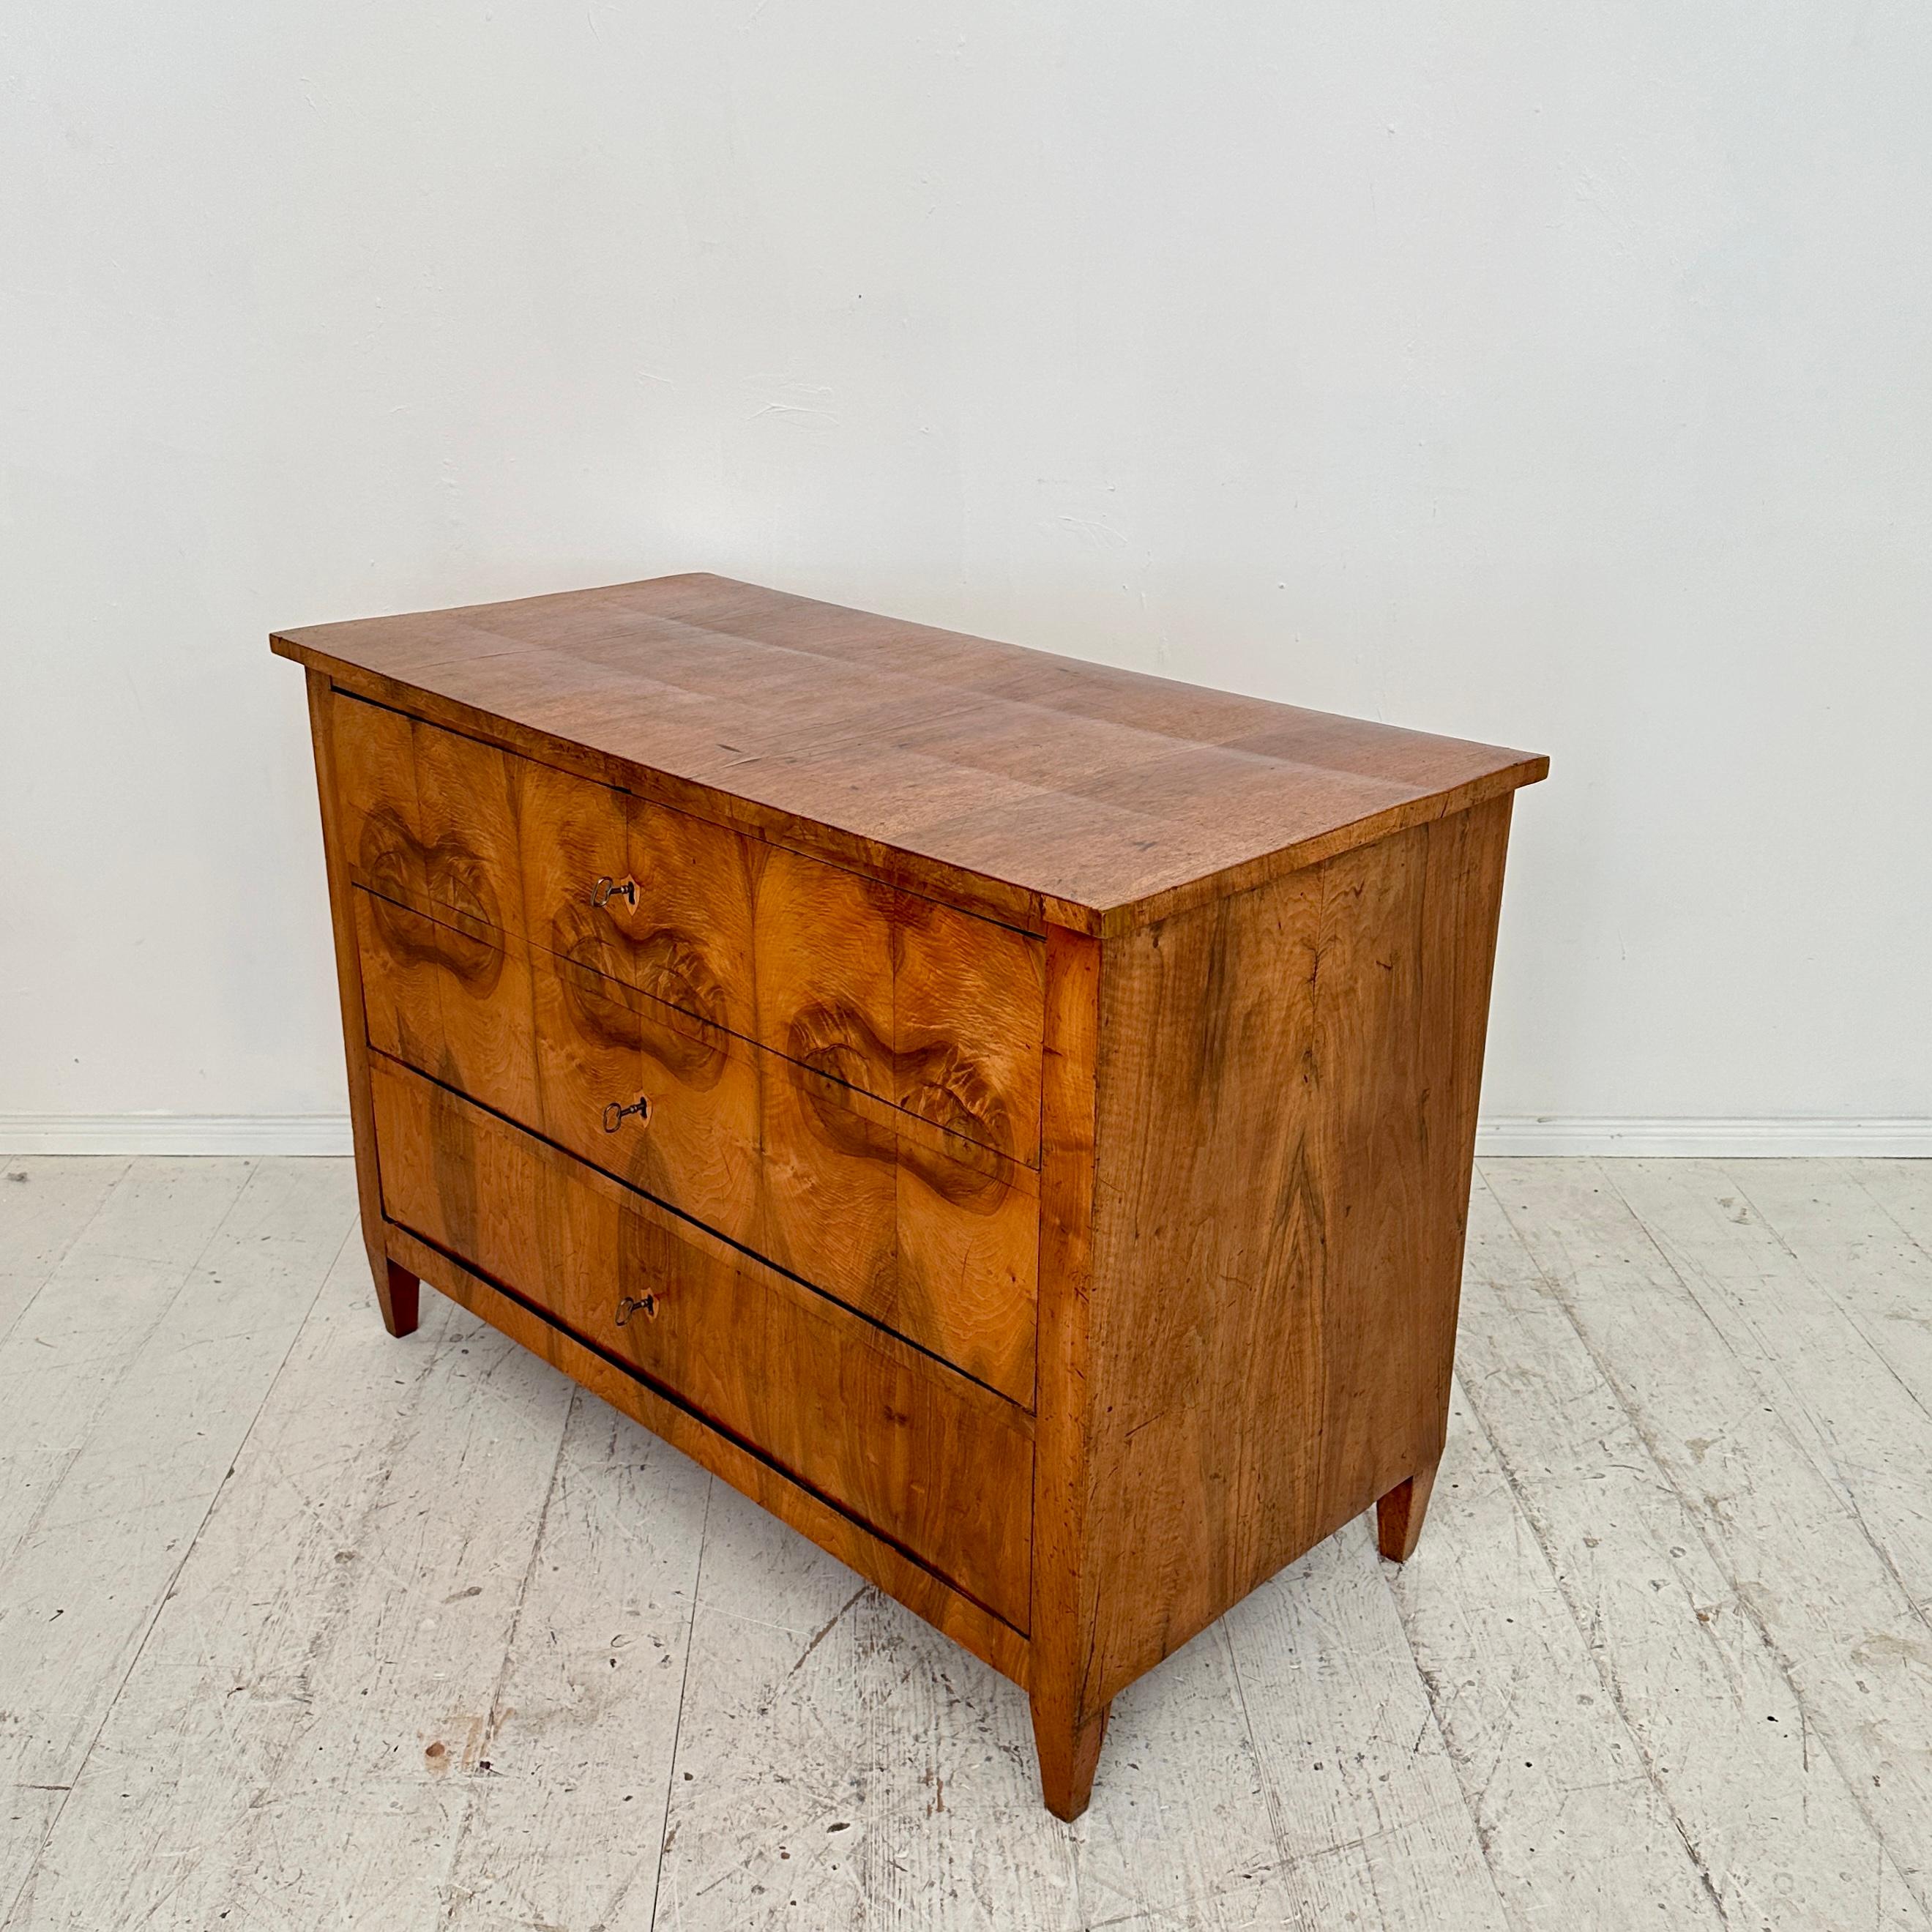 19th Century German Biedermeier Chest of Drawers in Walnut with 3 Drawers, 1820 For Sale 6